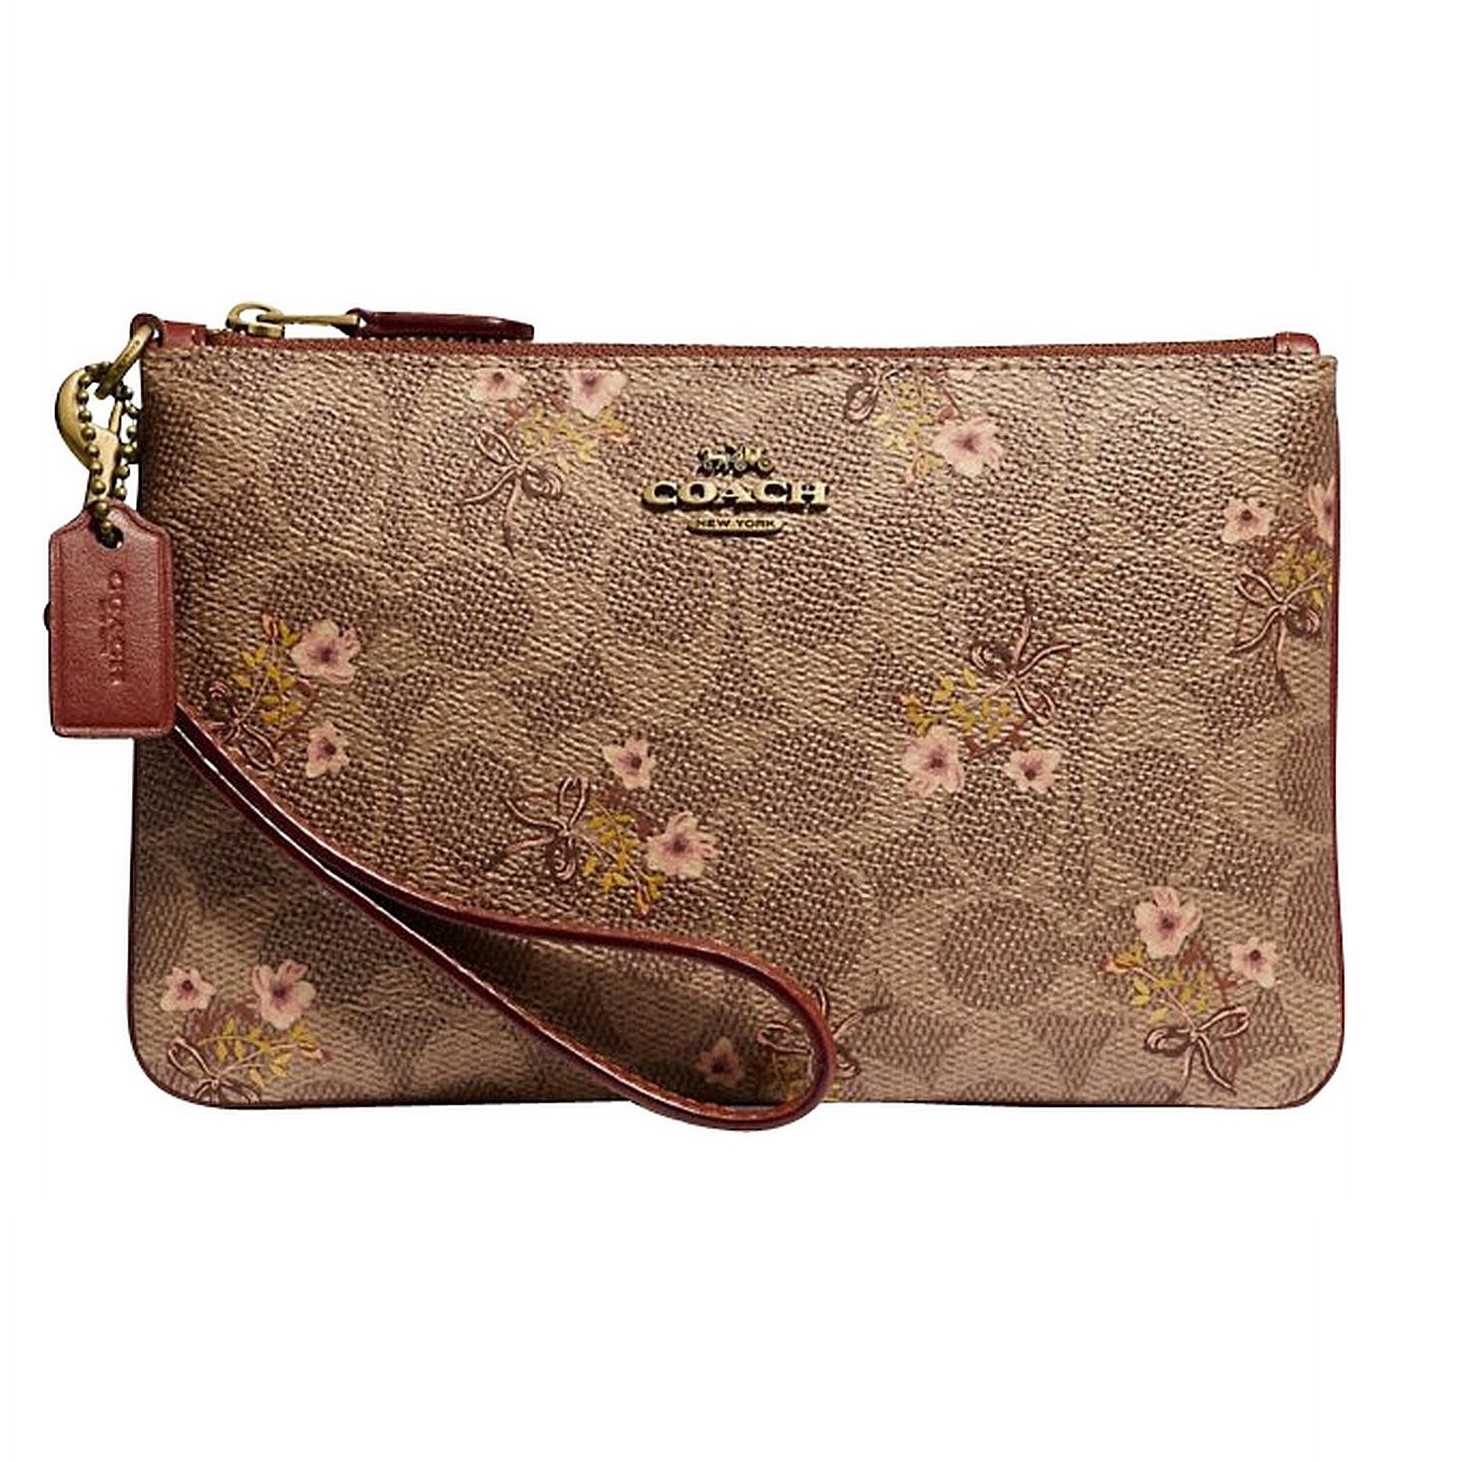 VÍ NỮ COACH SMALL WRISTLET IN SIGNATURE CANVAS WITH FLORAL BOW PRINT F67070 3